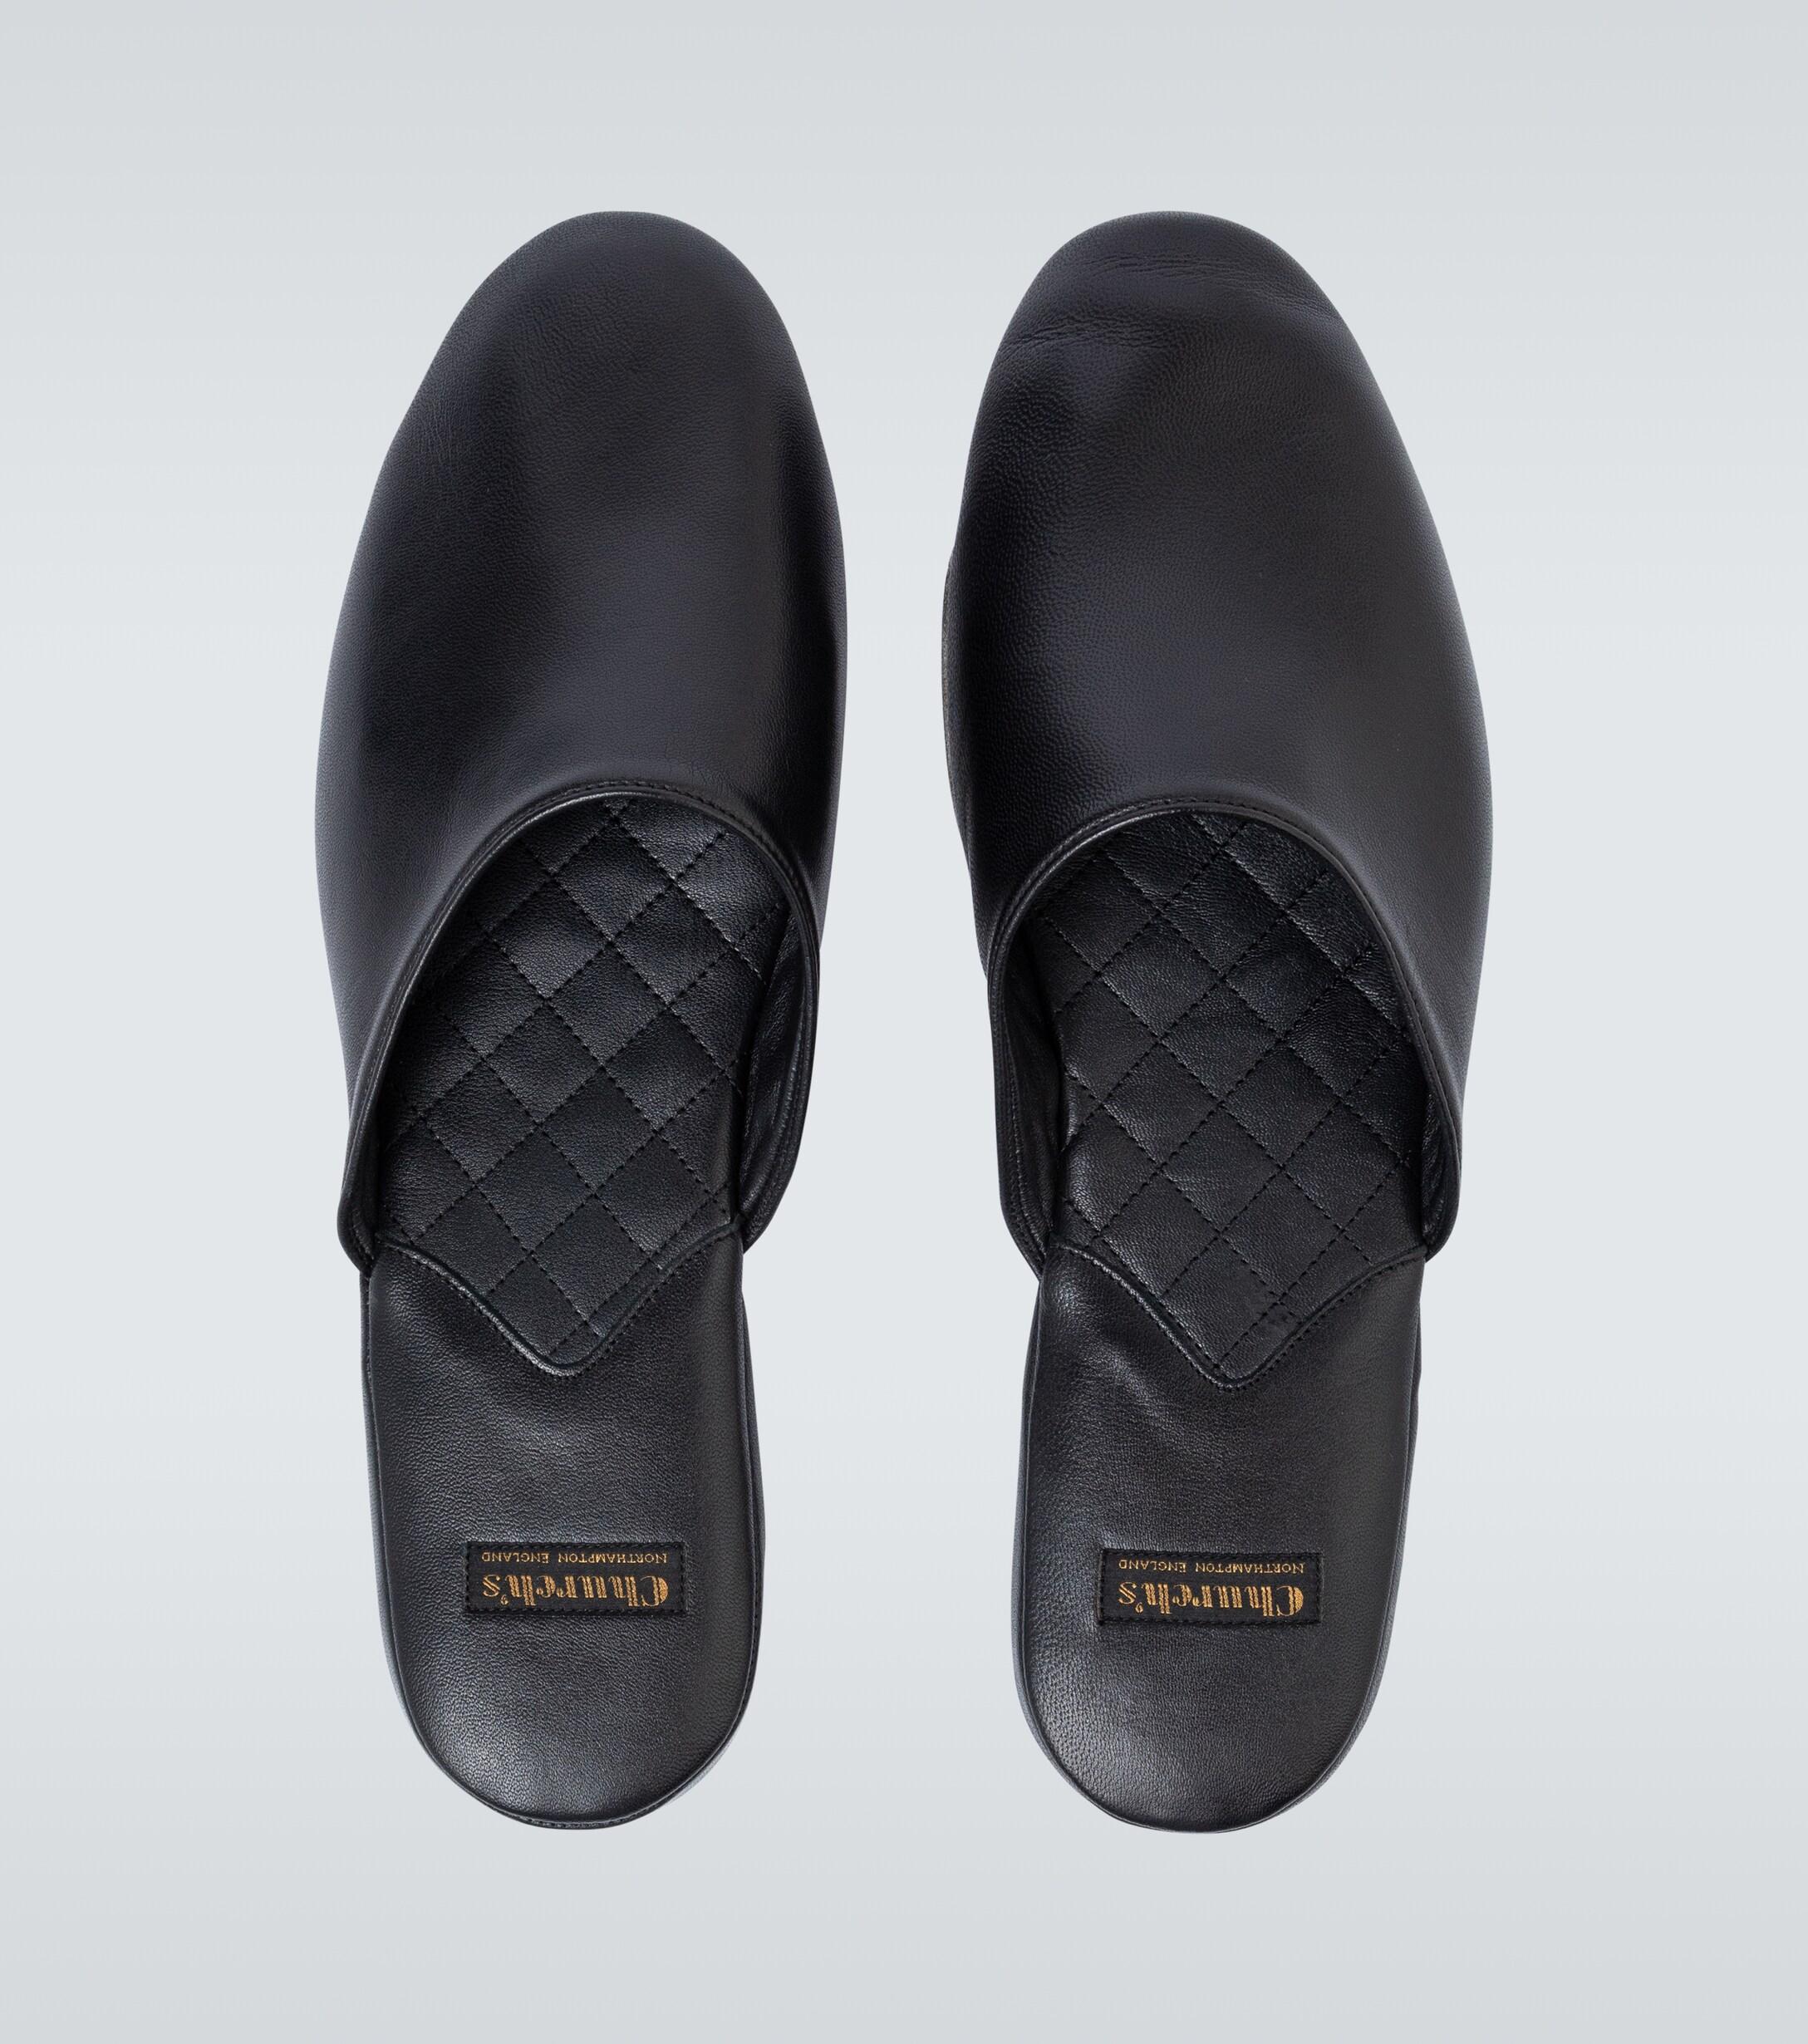 Church's Air Travel 03 Slippers in Black for Men - Save 52% - Lyst